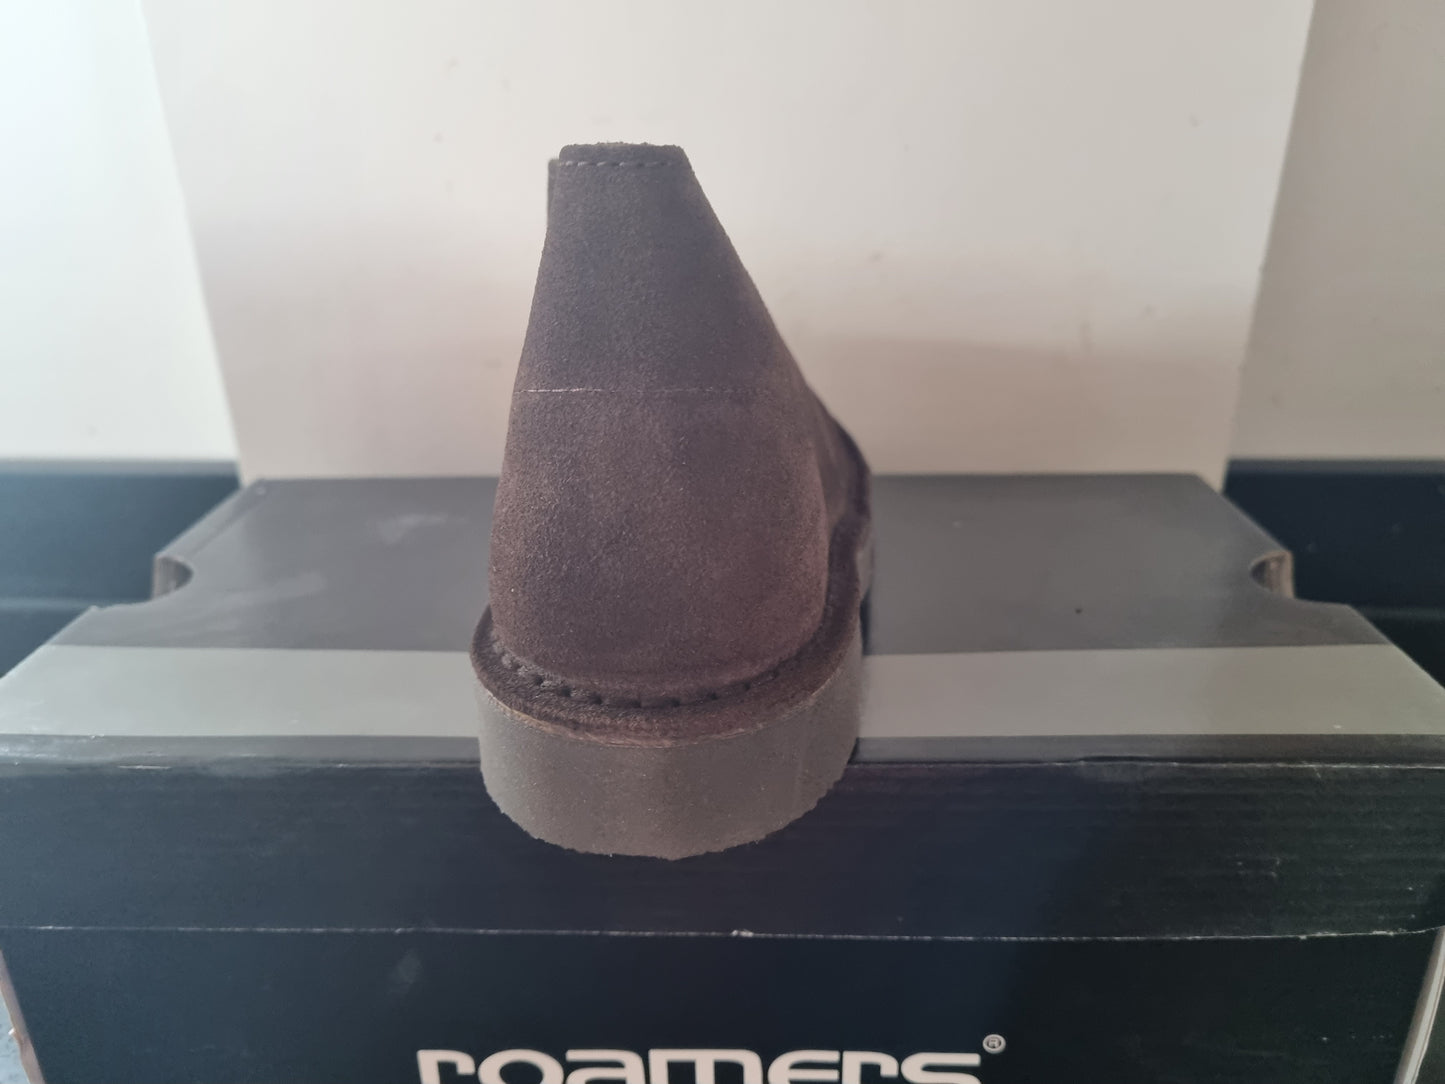 Desert Boot by Roamers - 2 Eye Chocolate Suede Leather (M467DBS)